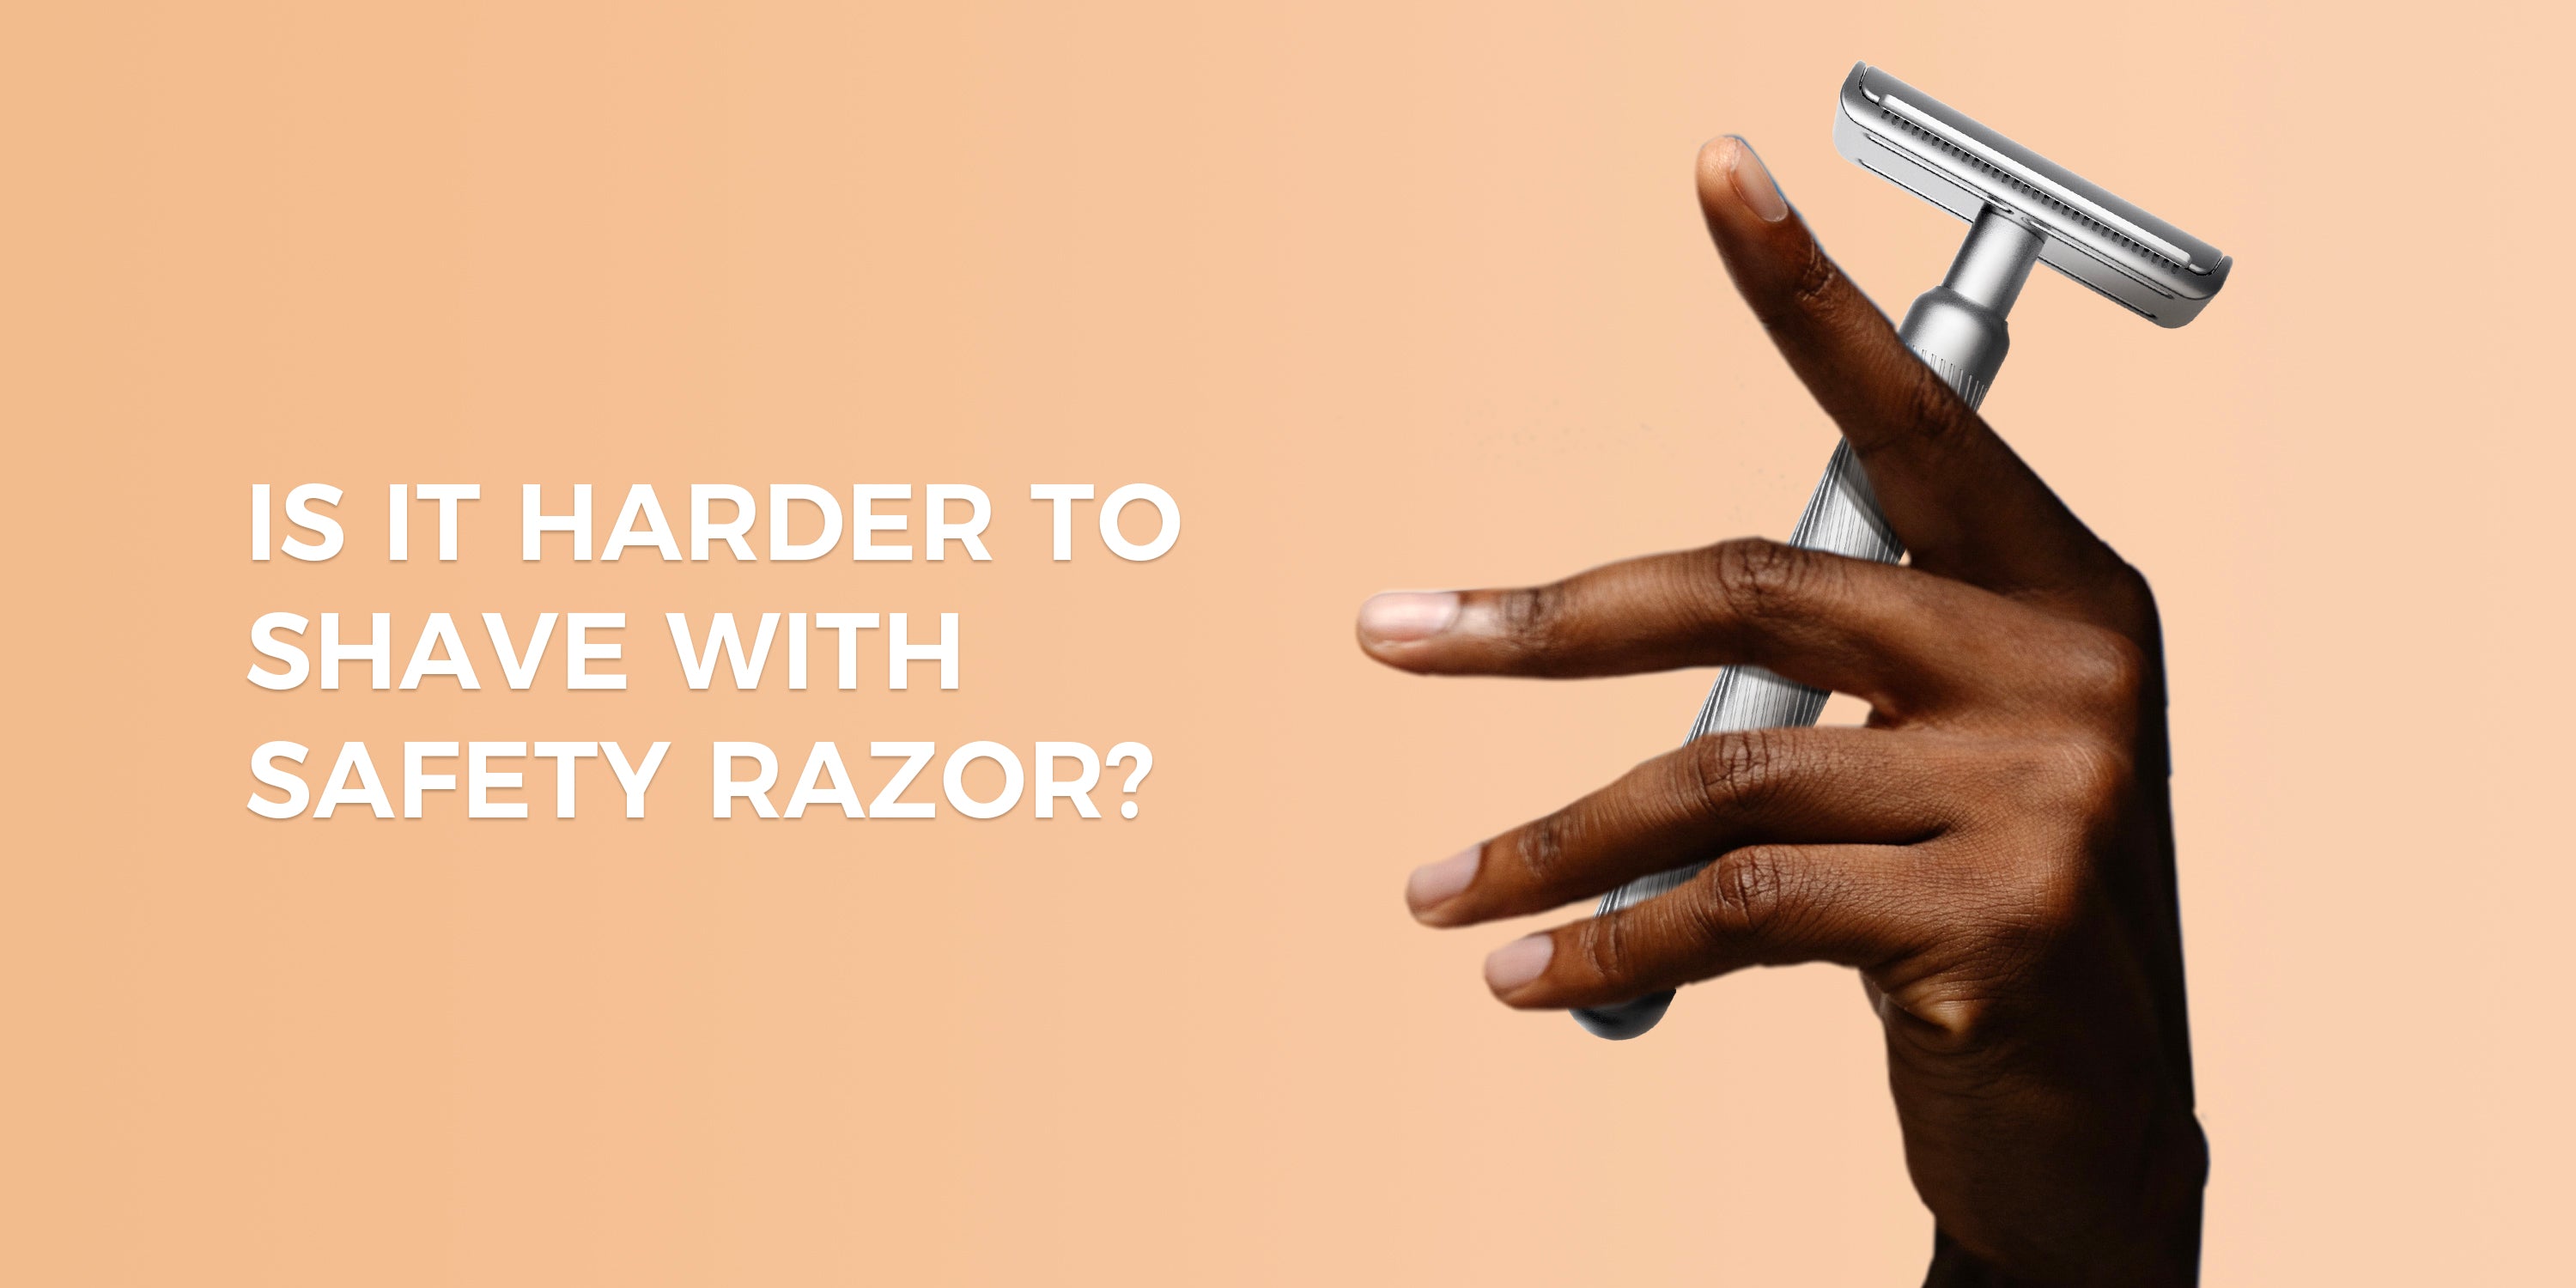 Is it harder to shave with safety razor?